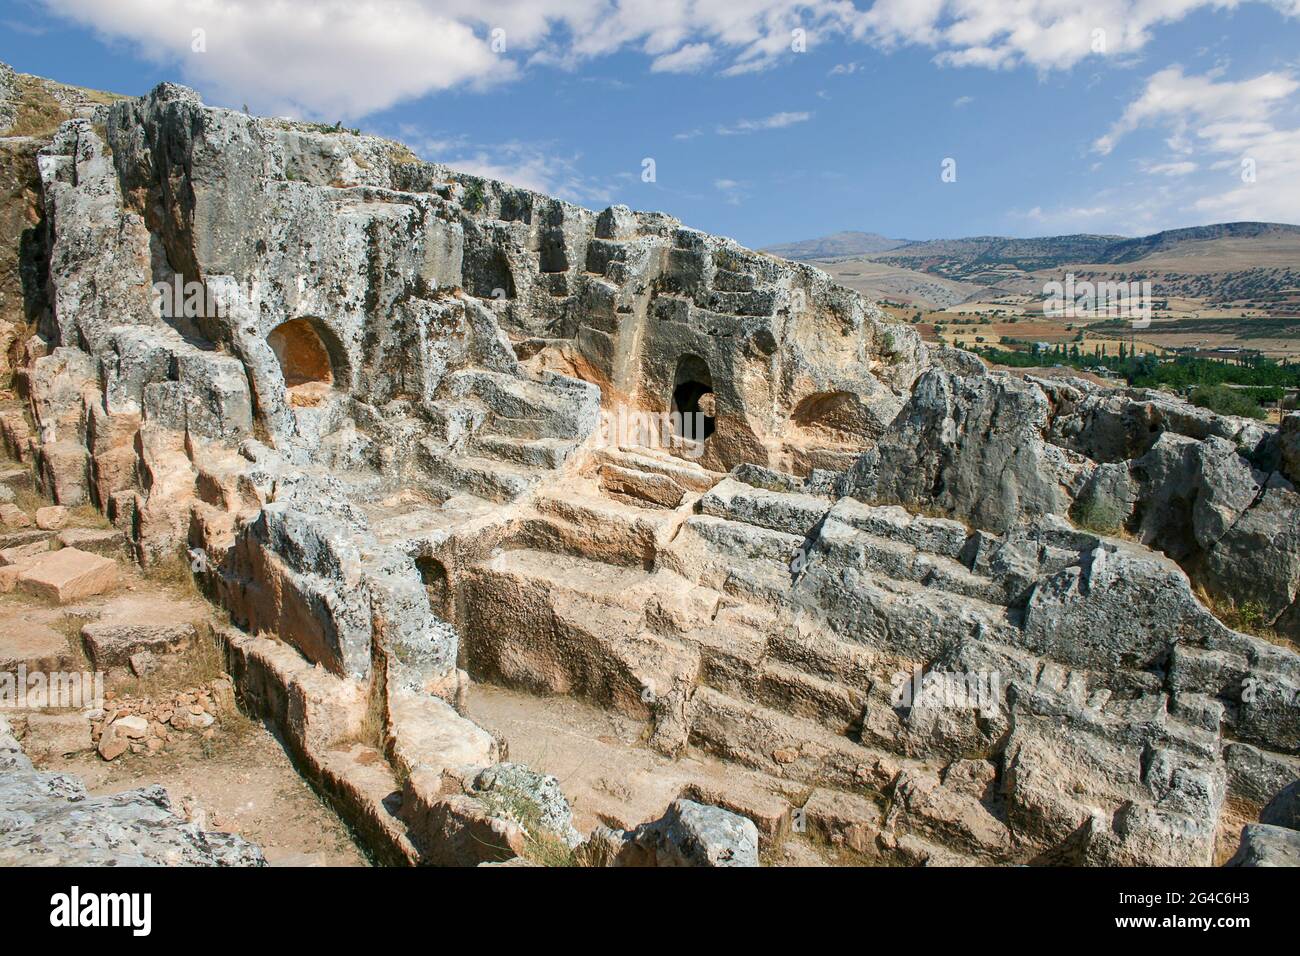 Cave tombs and dwellings in the ruins of the ancient site of Perre in Adiyaman, Turkey Stock Photo